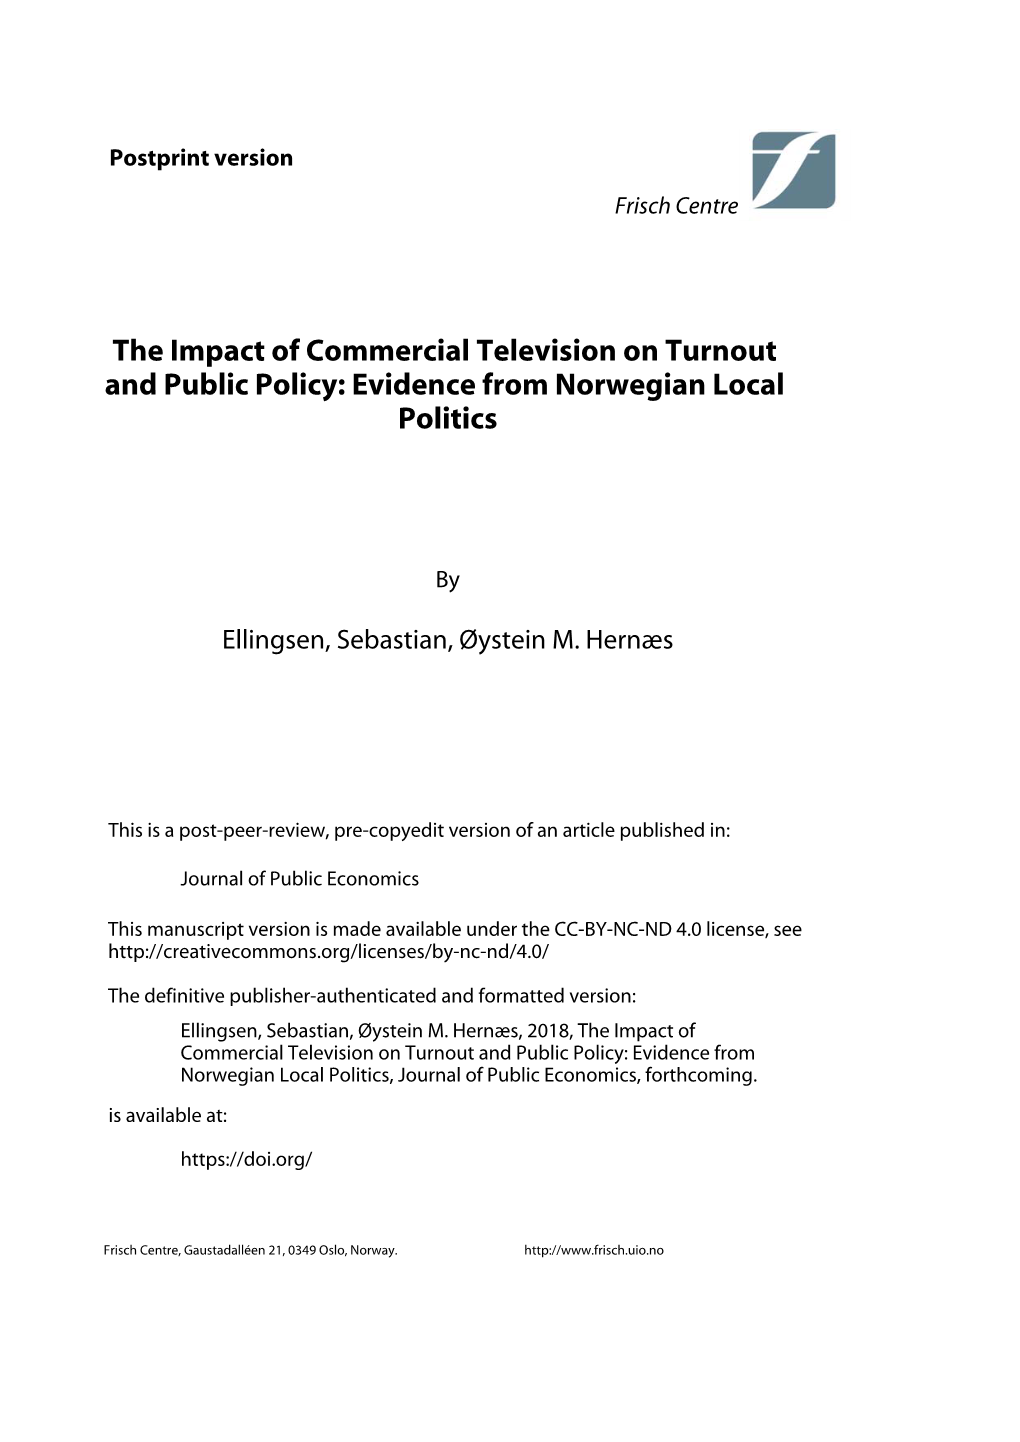 The Impact of Commercial Television on Turnout and Public Policy: Evidence from Norwegian Local Politics